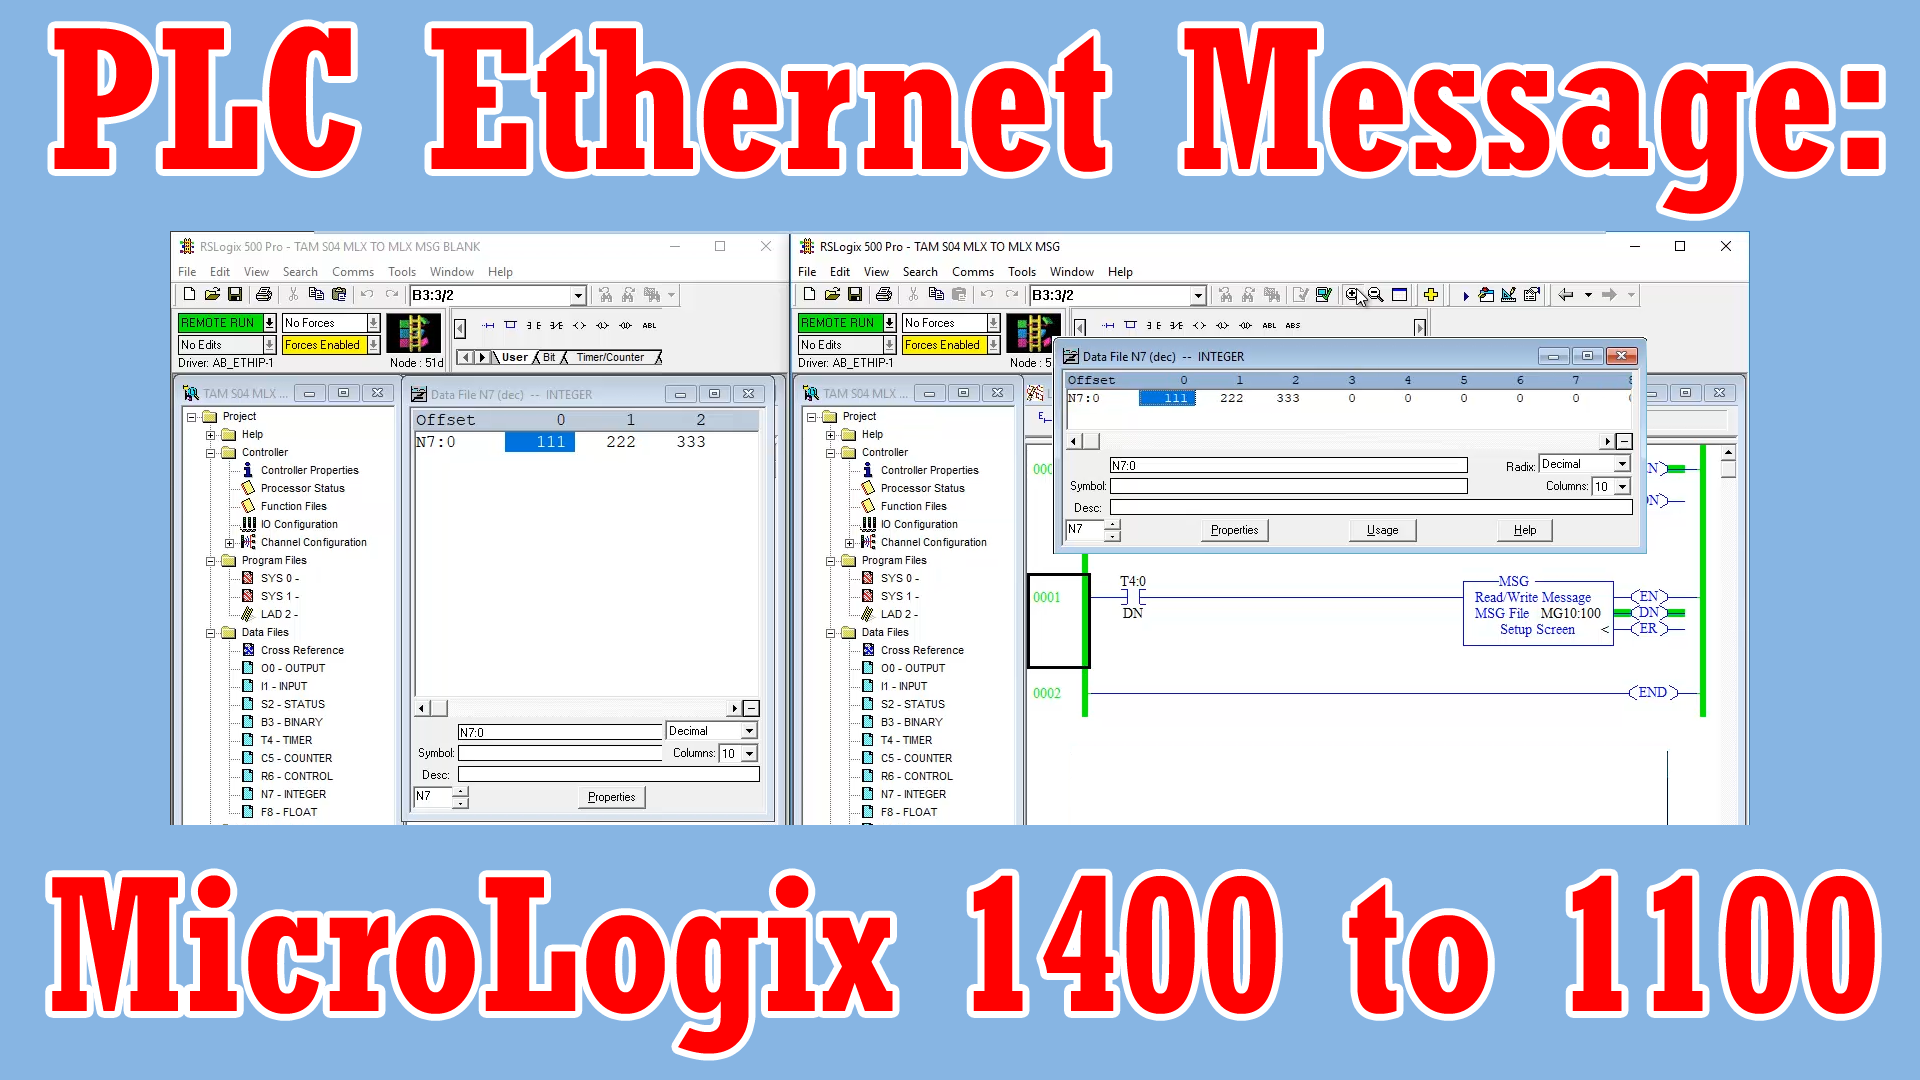 Message (MSG) - MicroLogix Reading and Writing Data over Ethernet (M4E44)